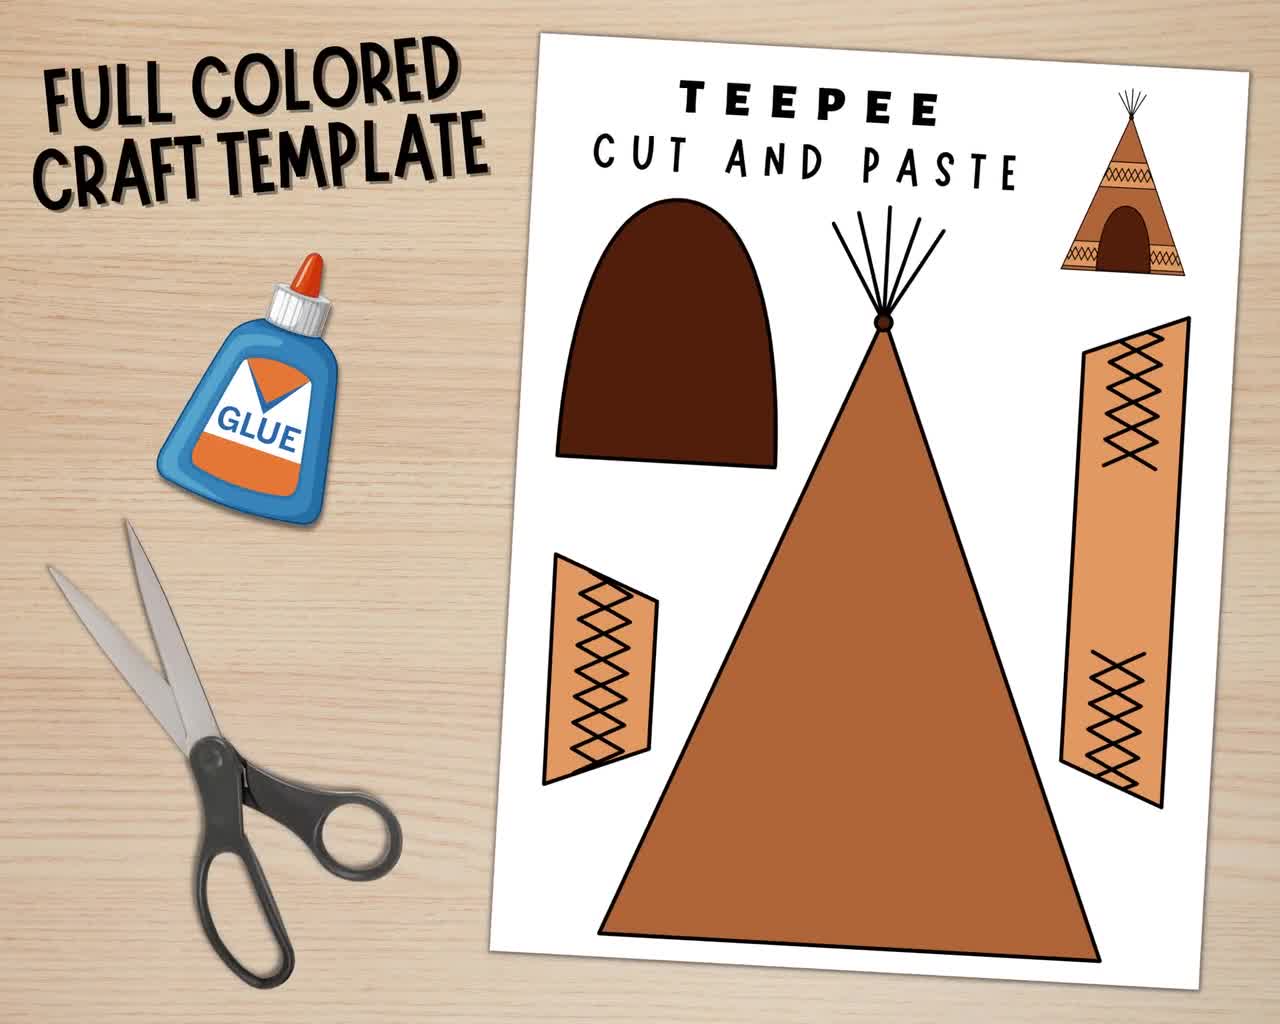 Printable teepee craft native american day craft activity thanksgiving activities color cut and paste paper teepee pdf download now